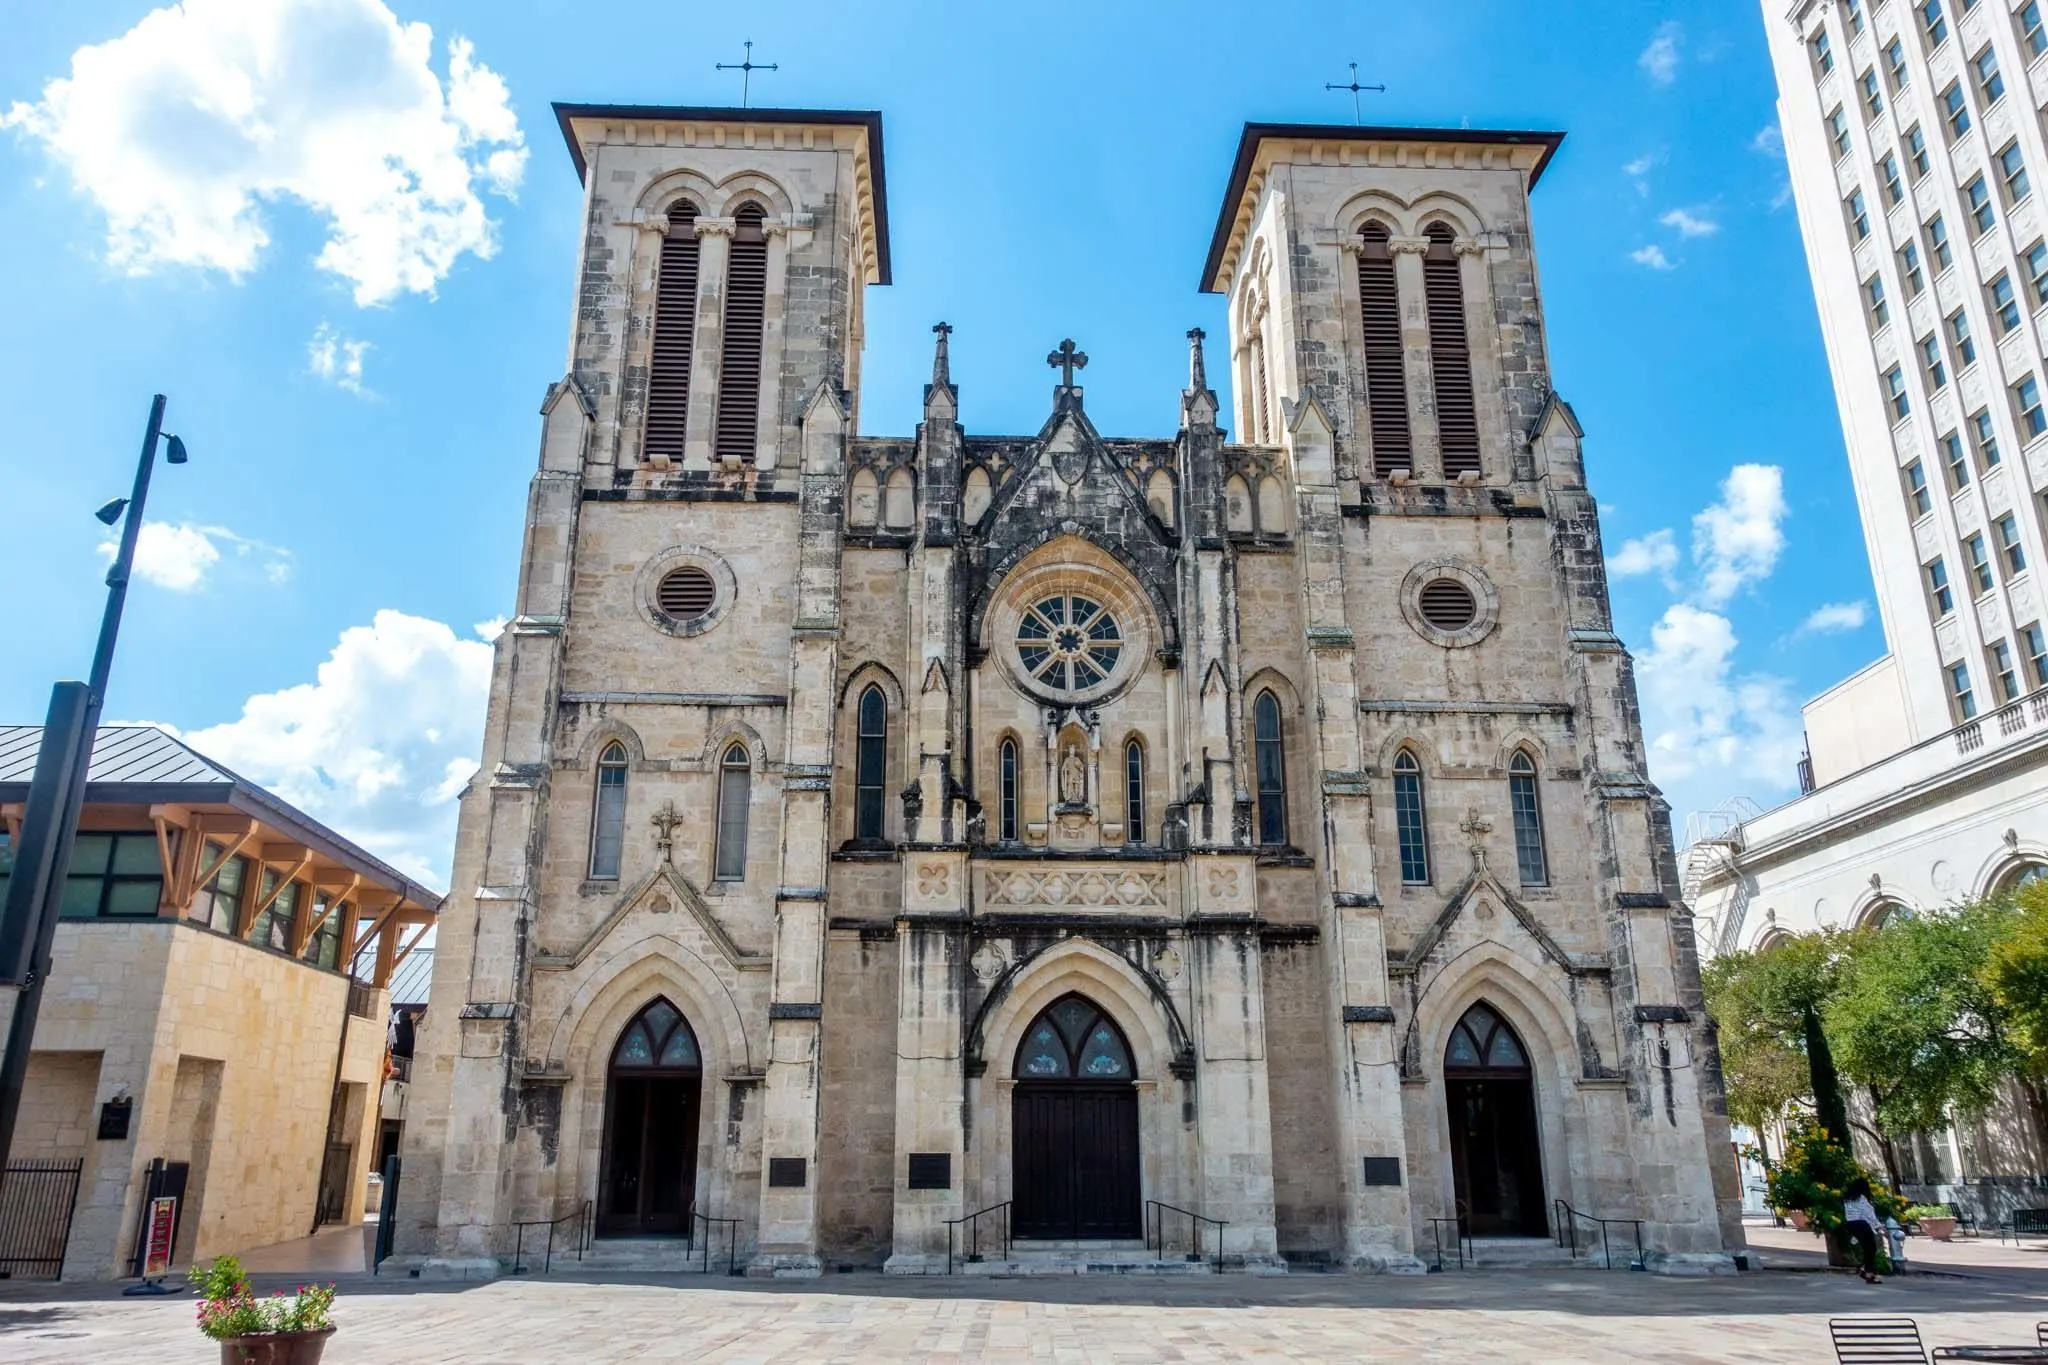 Exterior of a stone cathedral with two towers